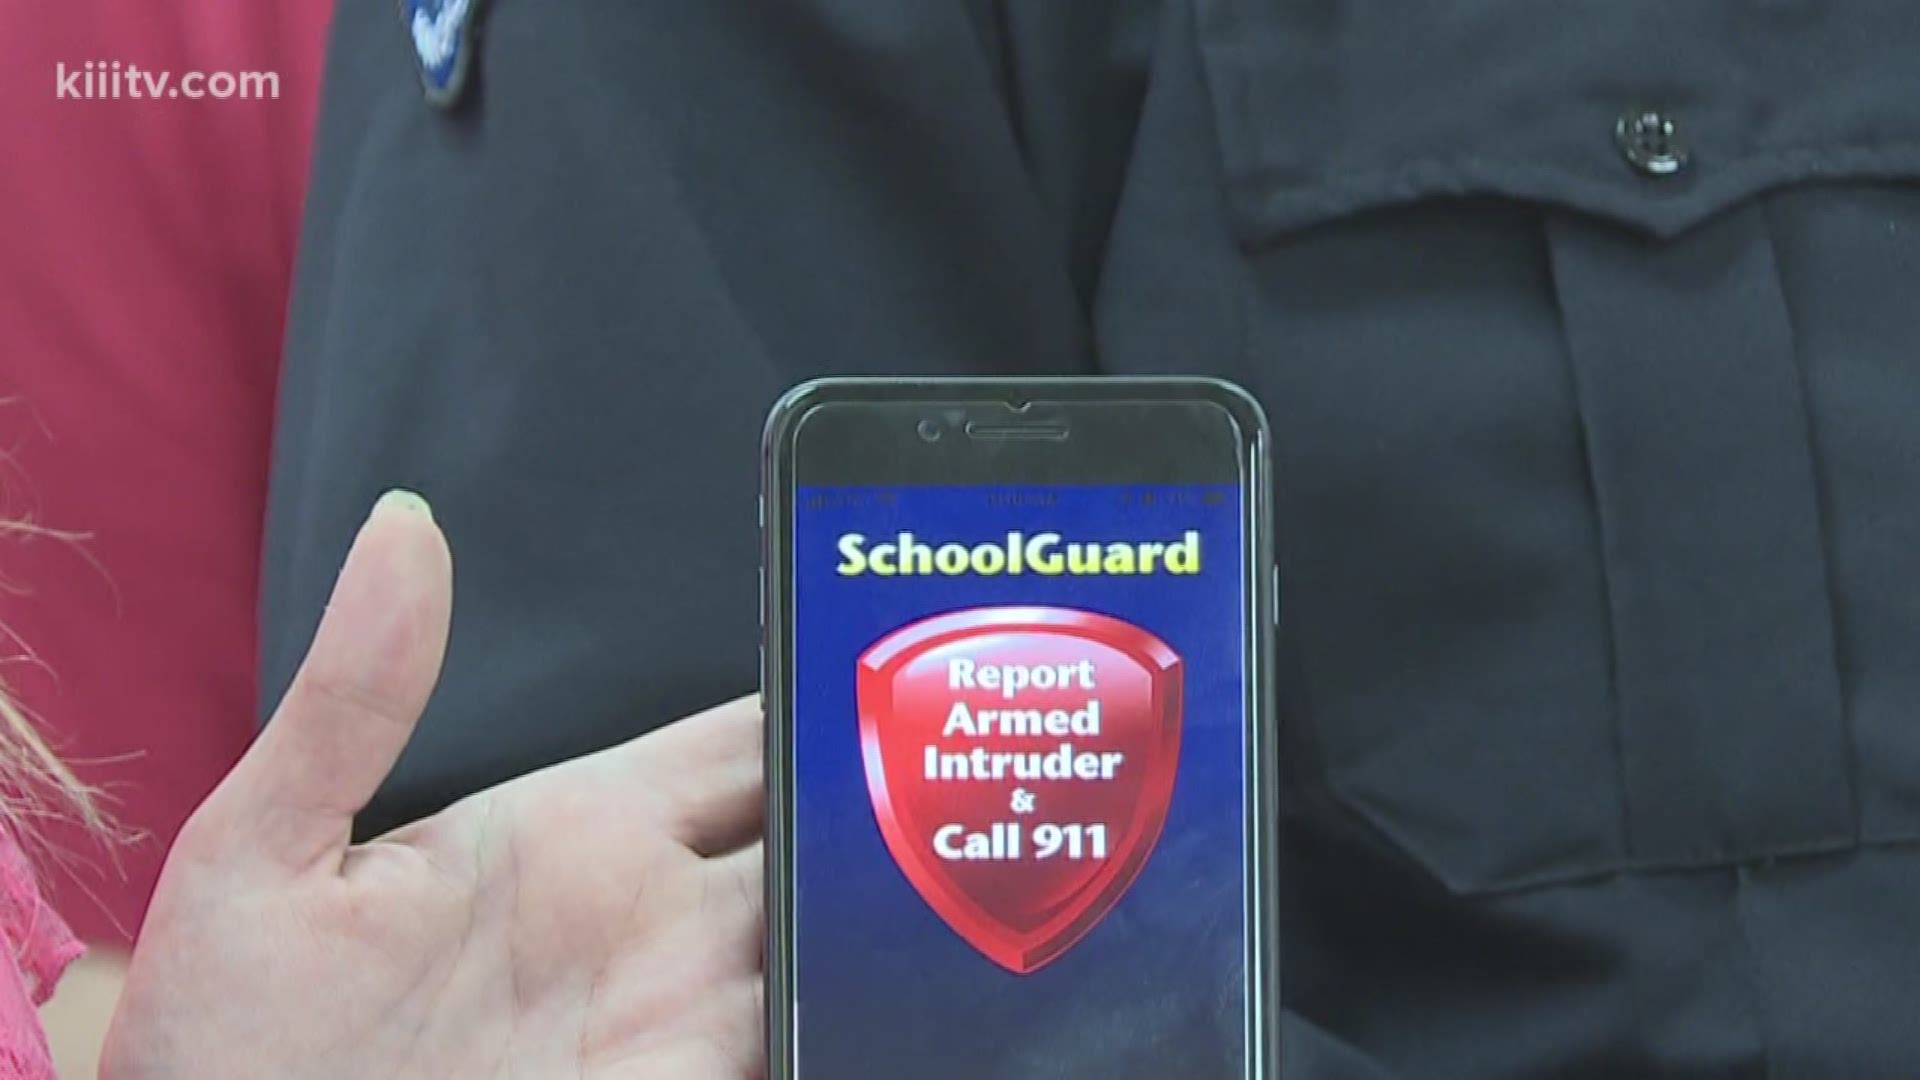 The Port Aransas Police Department is joining forces with their school district to add one more line of defense in the event of an active-shooter situation.